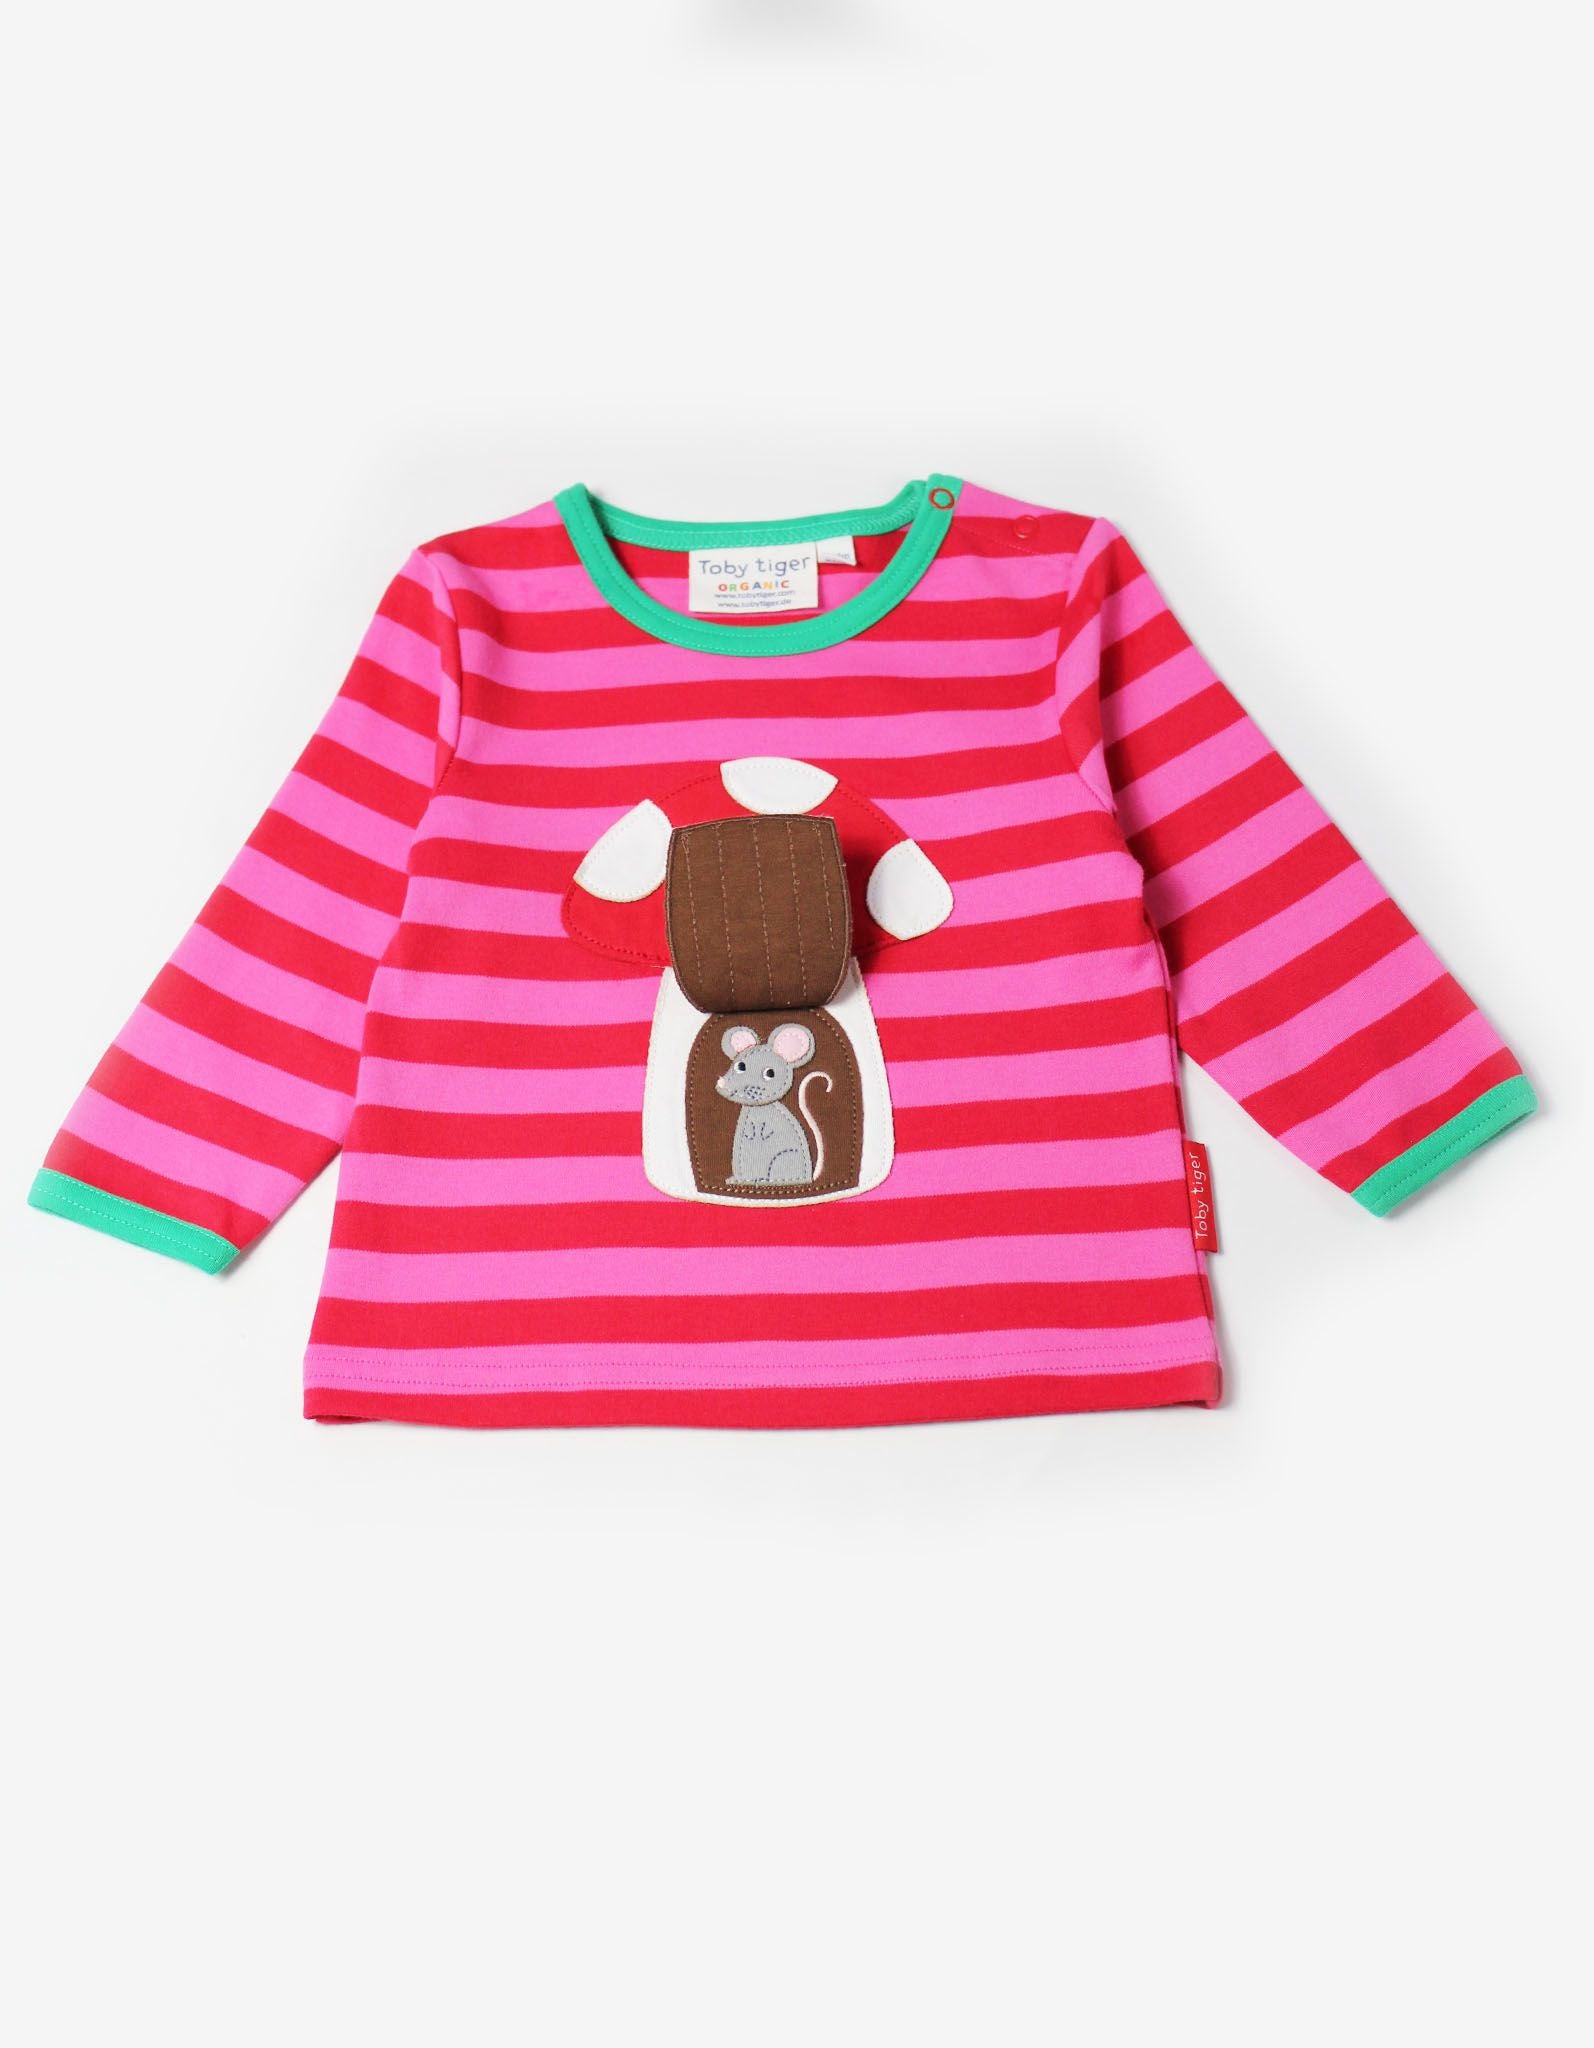 red and pink striped t shirt with mushroom and mouse applique